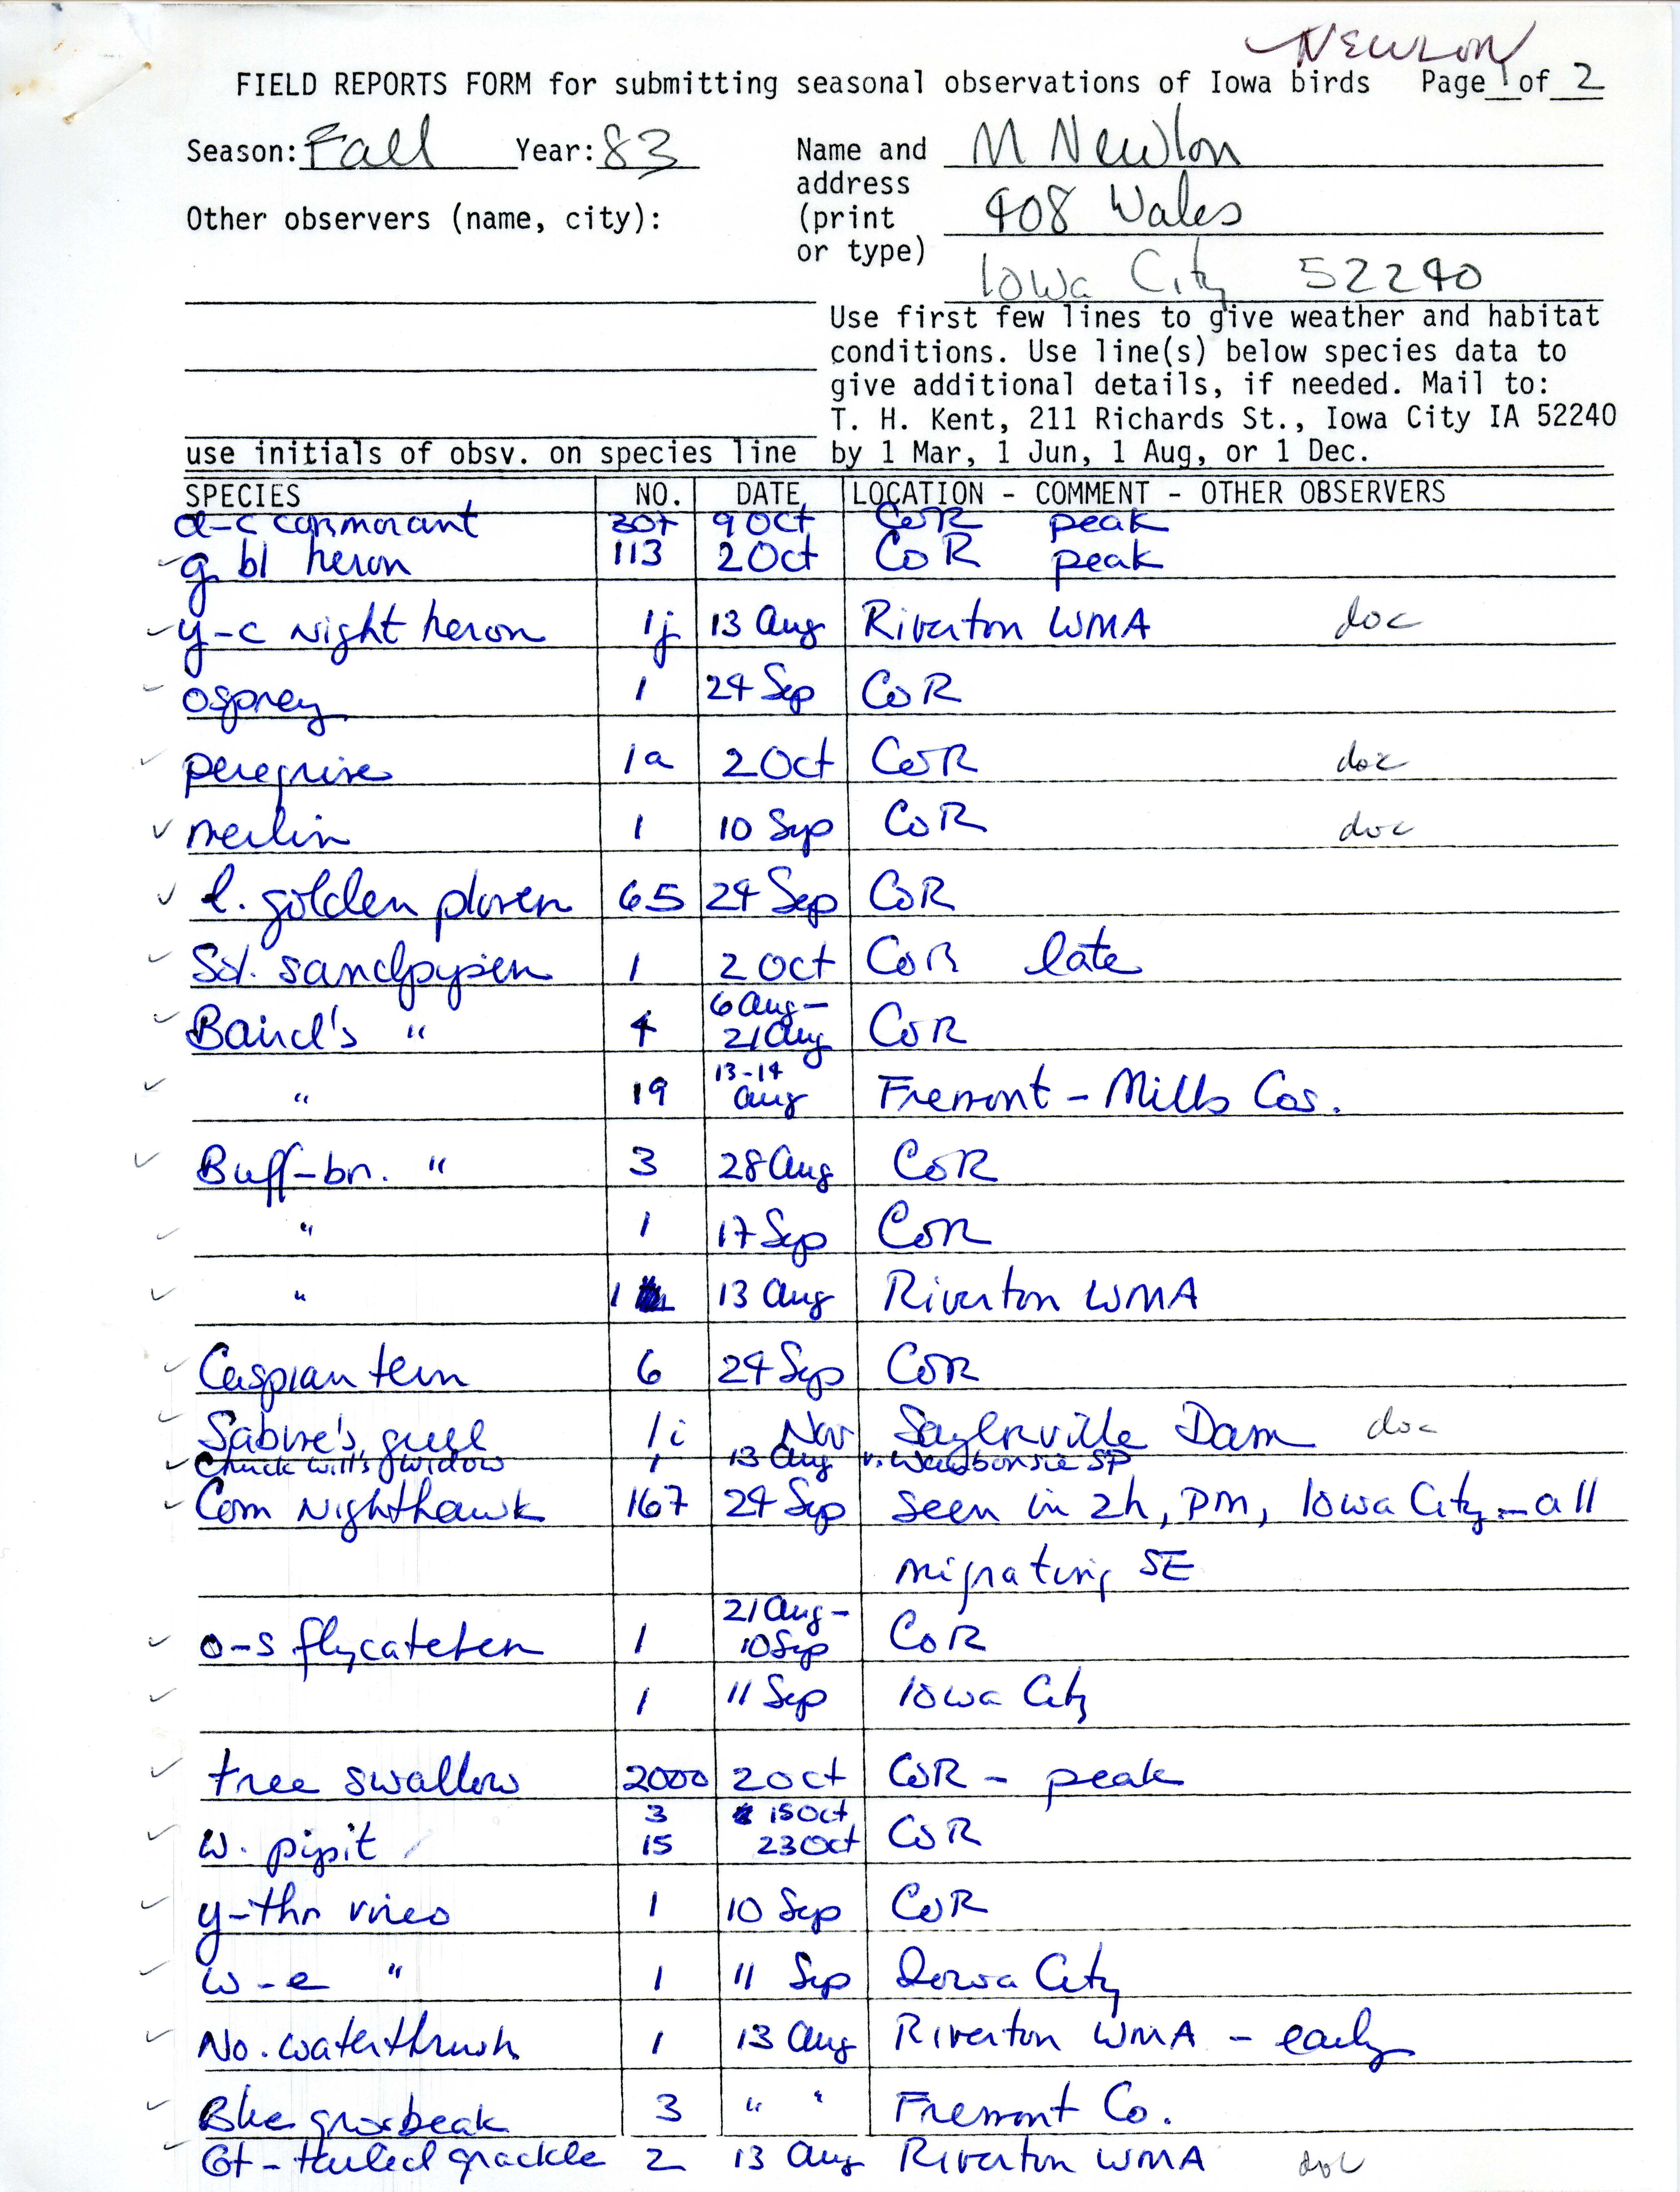 Field reports form for submitting seasonal observations of Iowa birds, Michael Newlon, fall 1983